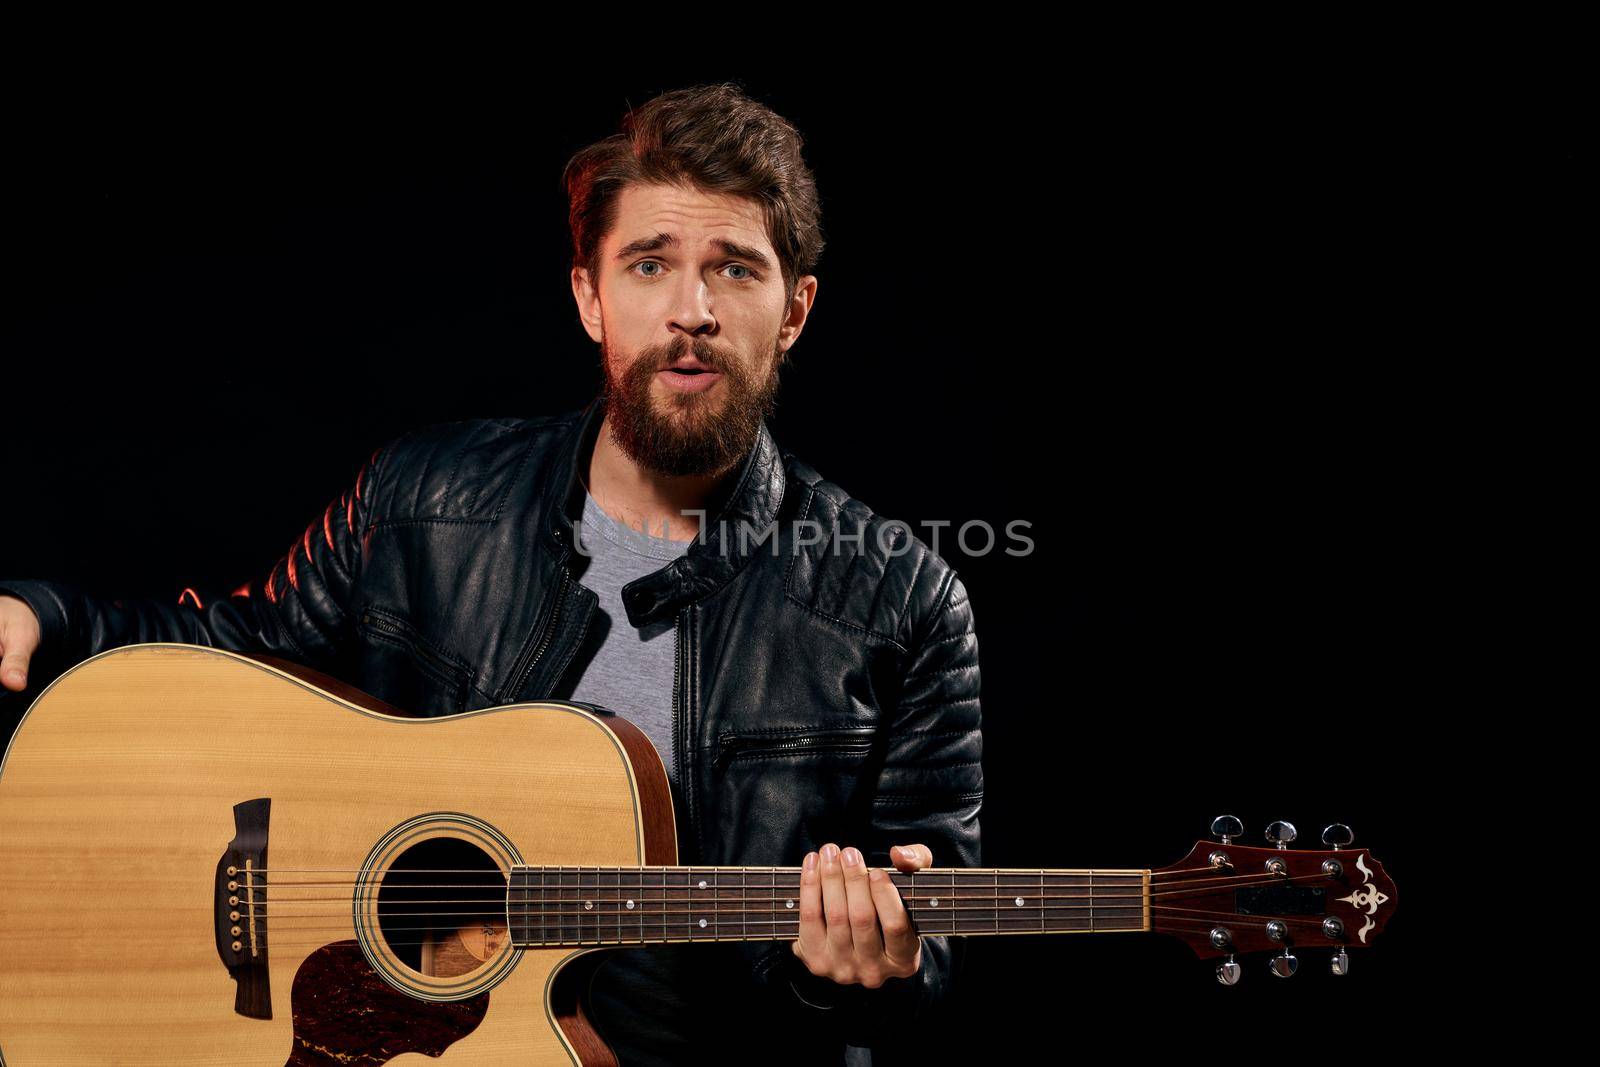 A man with a guitar in his hands leather jacket music performance rock star modern style dark background. High quality photo